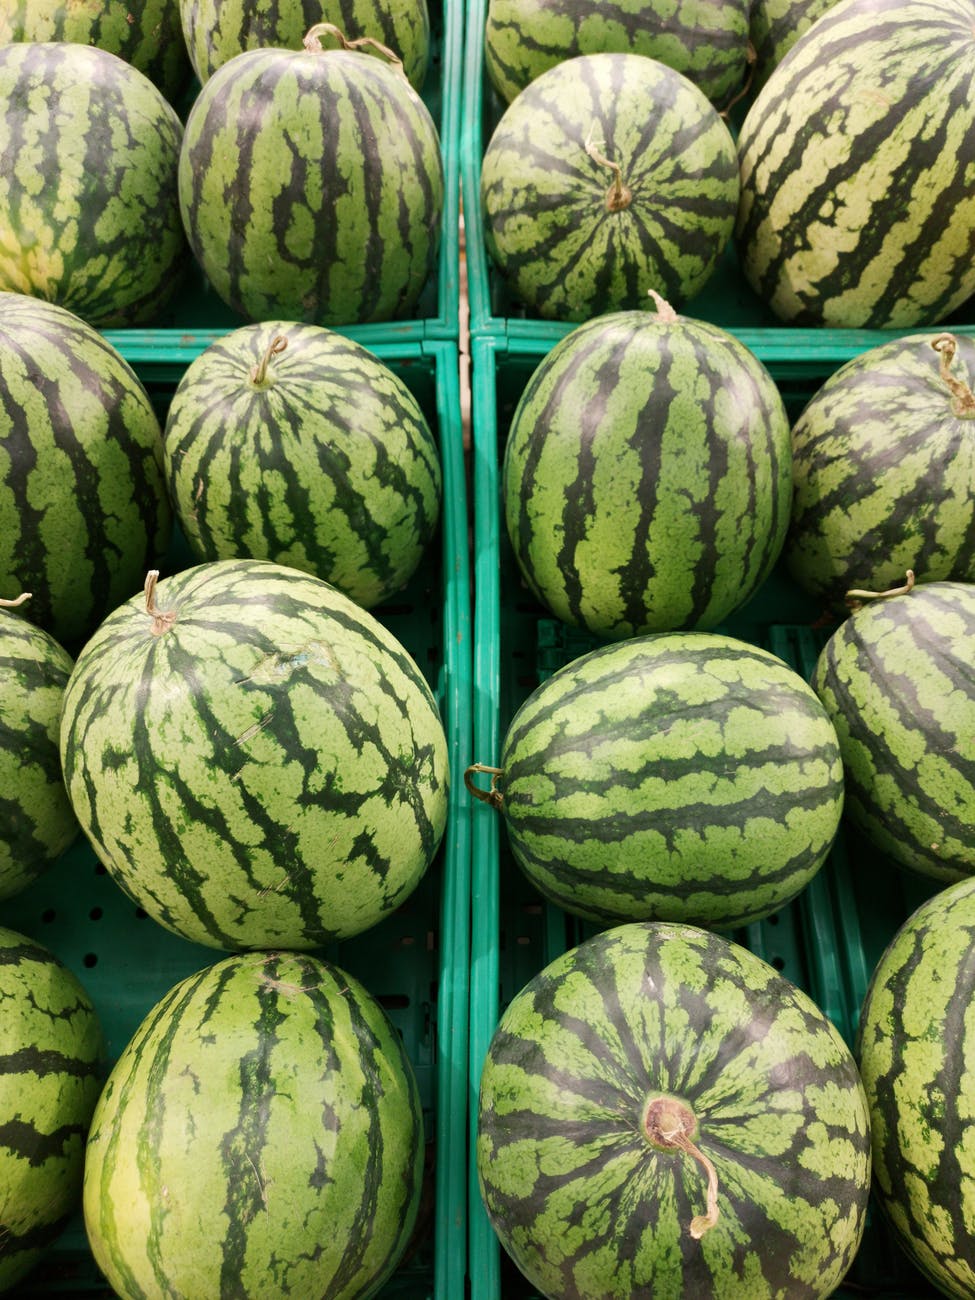 Featured image for “Watermelon Day at N.C. State Farmers Market”